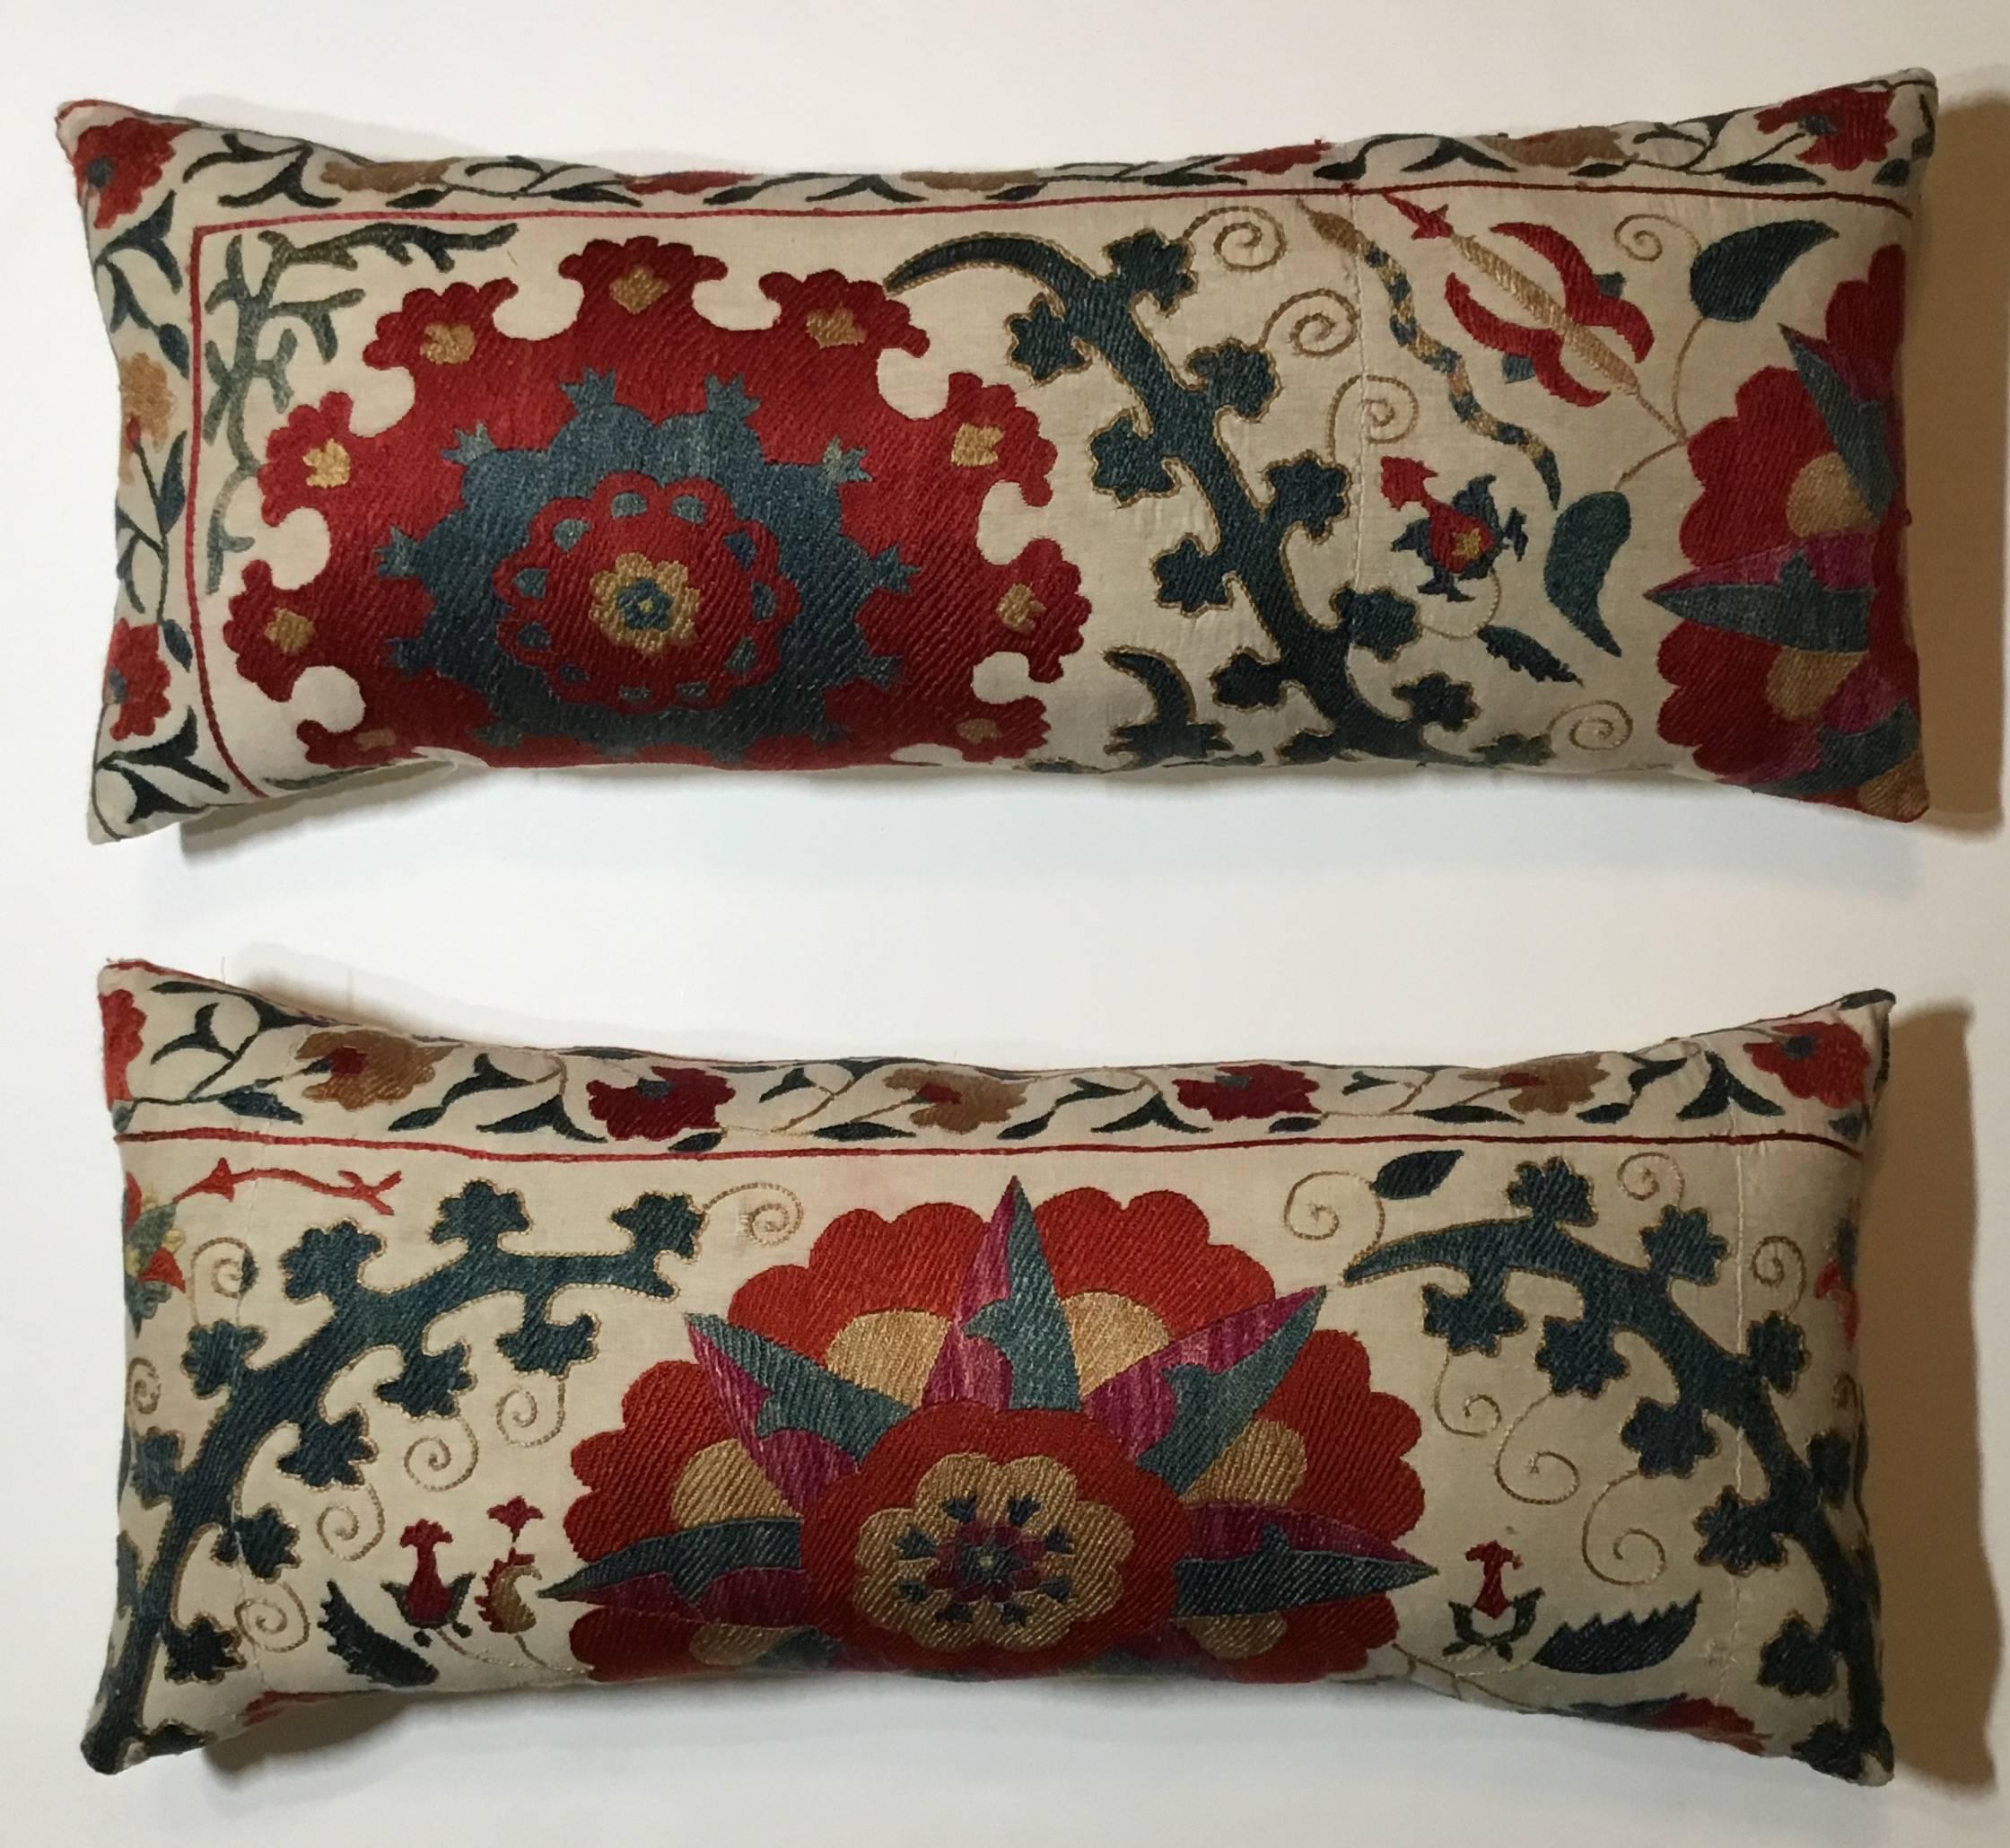 Beautiful pair of pillows made of hand embroidery silk of colorful flowers and vines on a cream color cotton background.
Silk backing, Frash insert.
Sizes
24" x 11"
25" x 10".